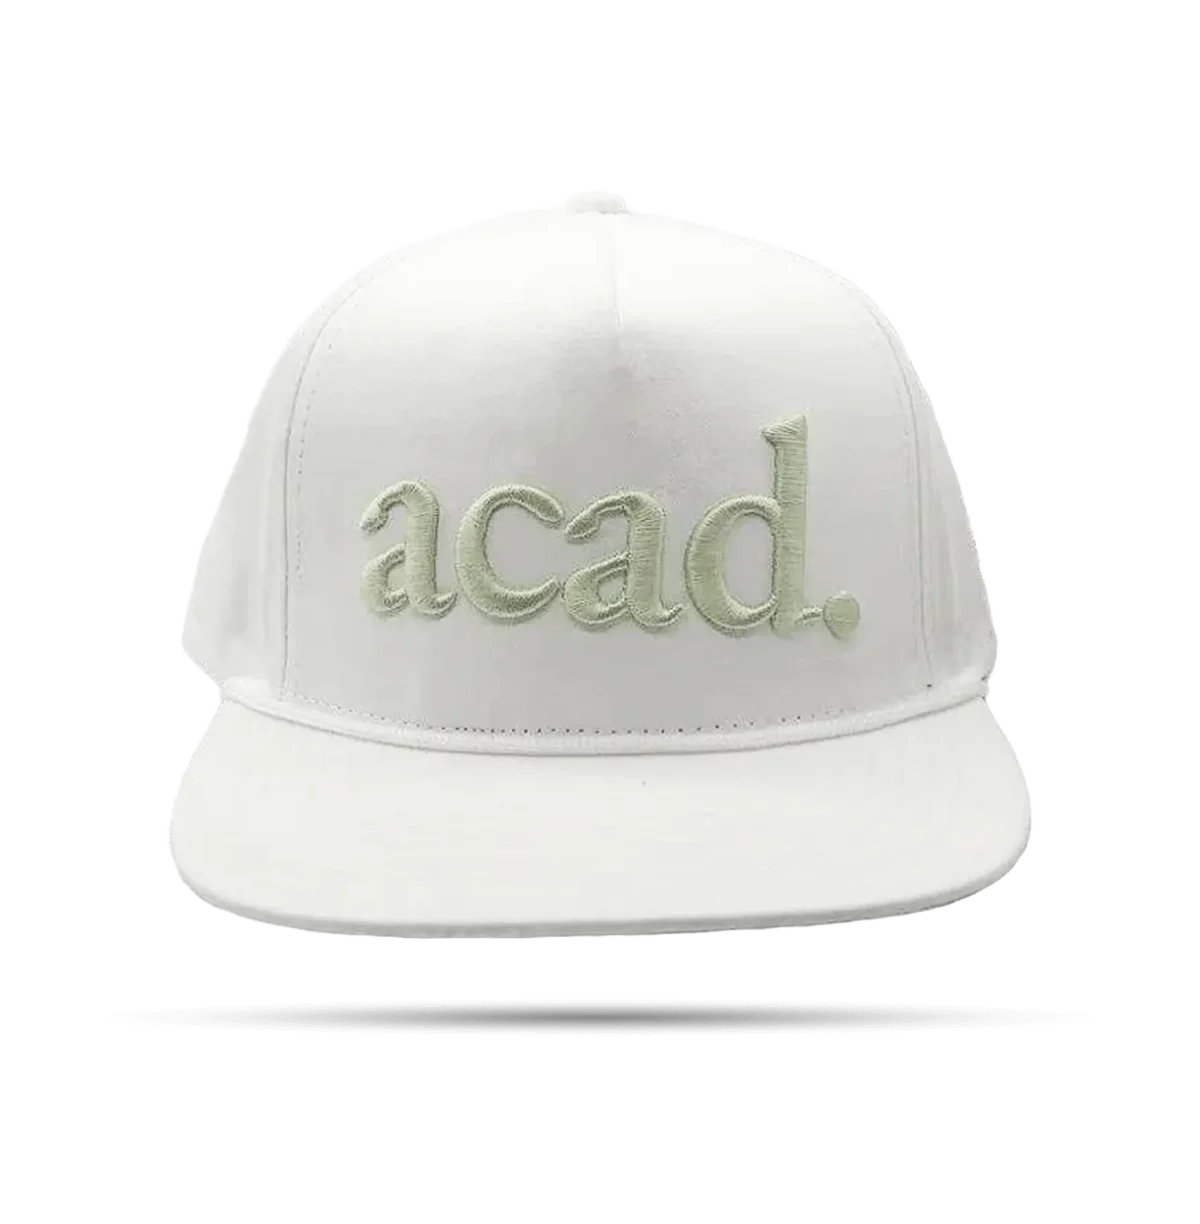 Flat Front ACAD cap with straight brim - White - Front